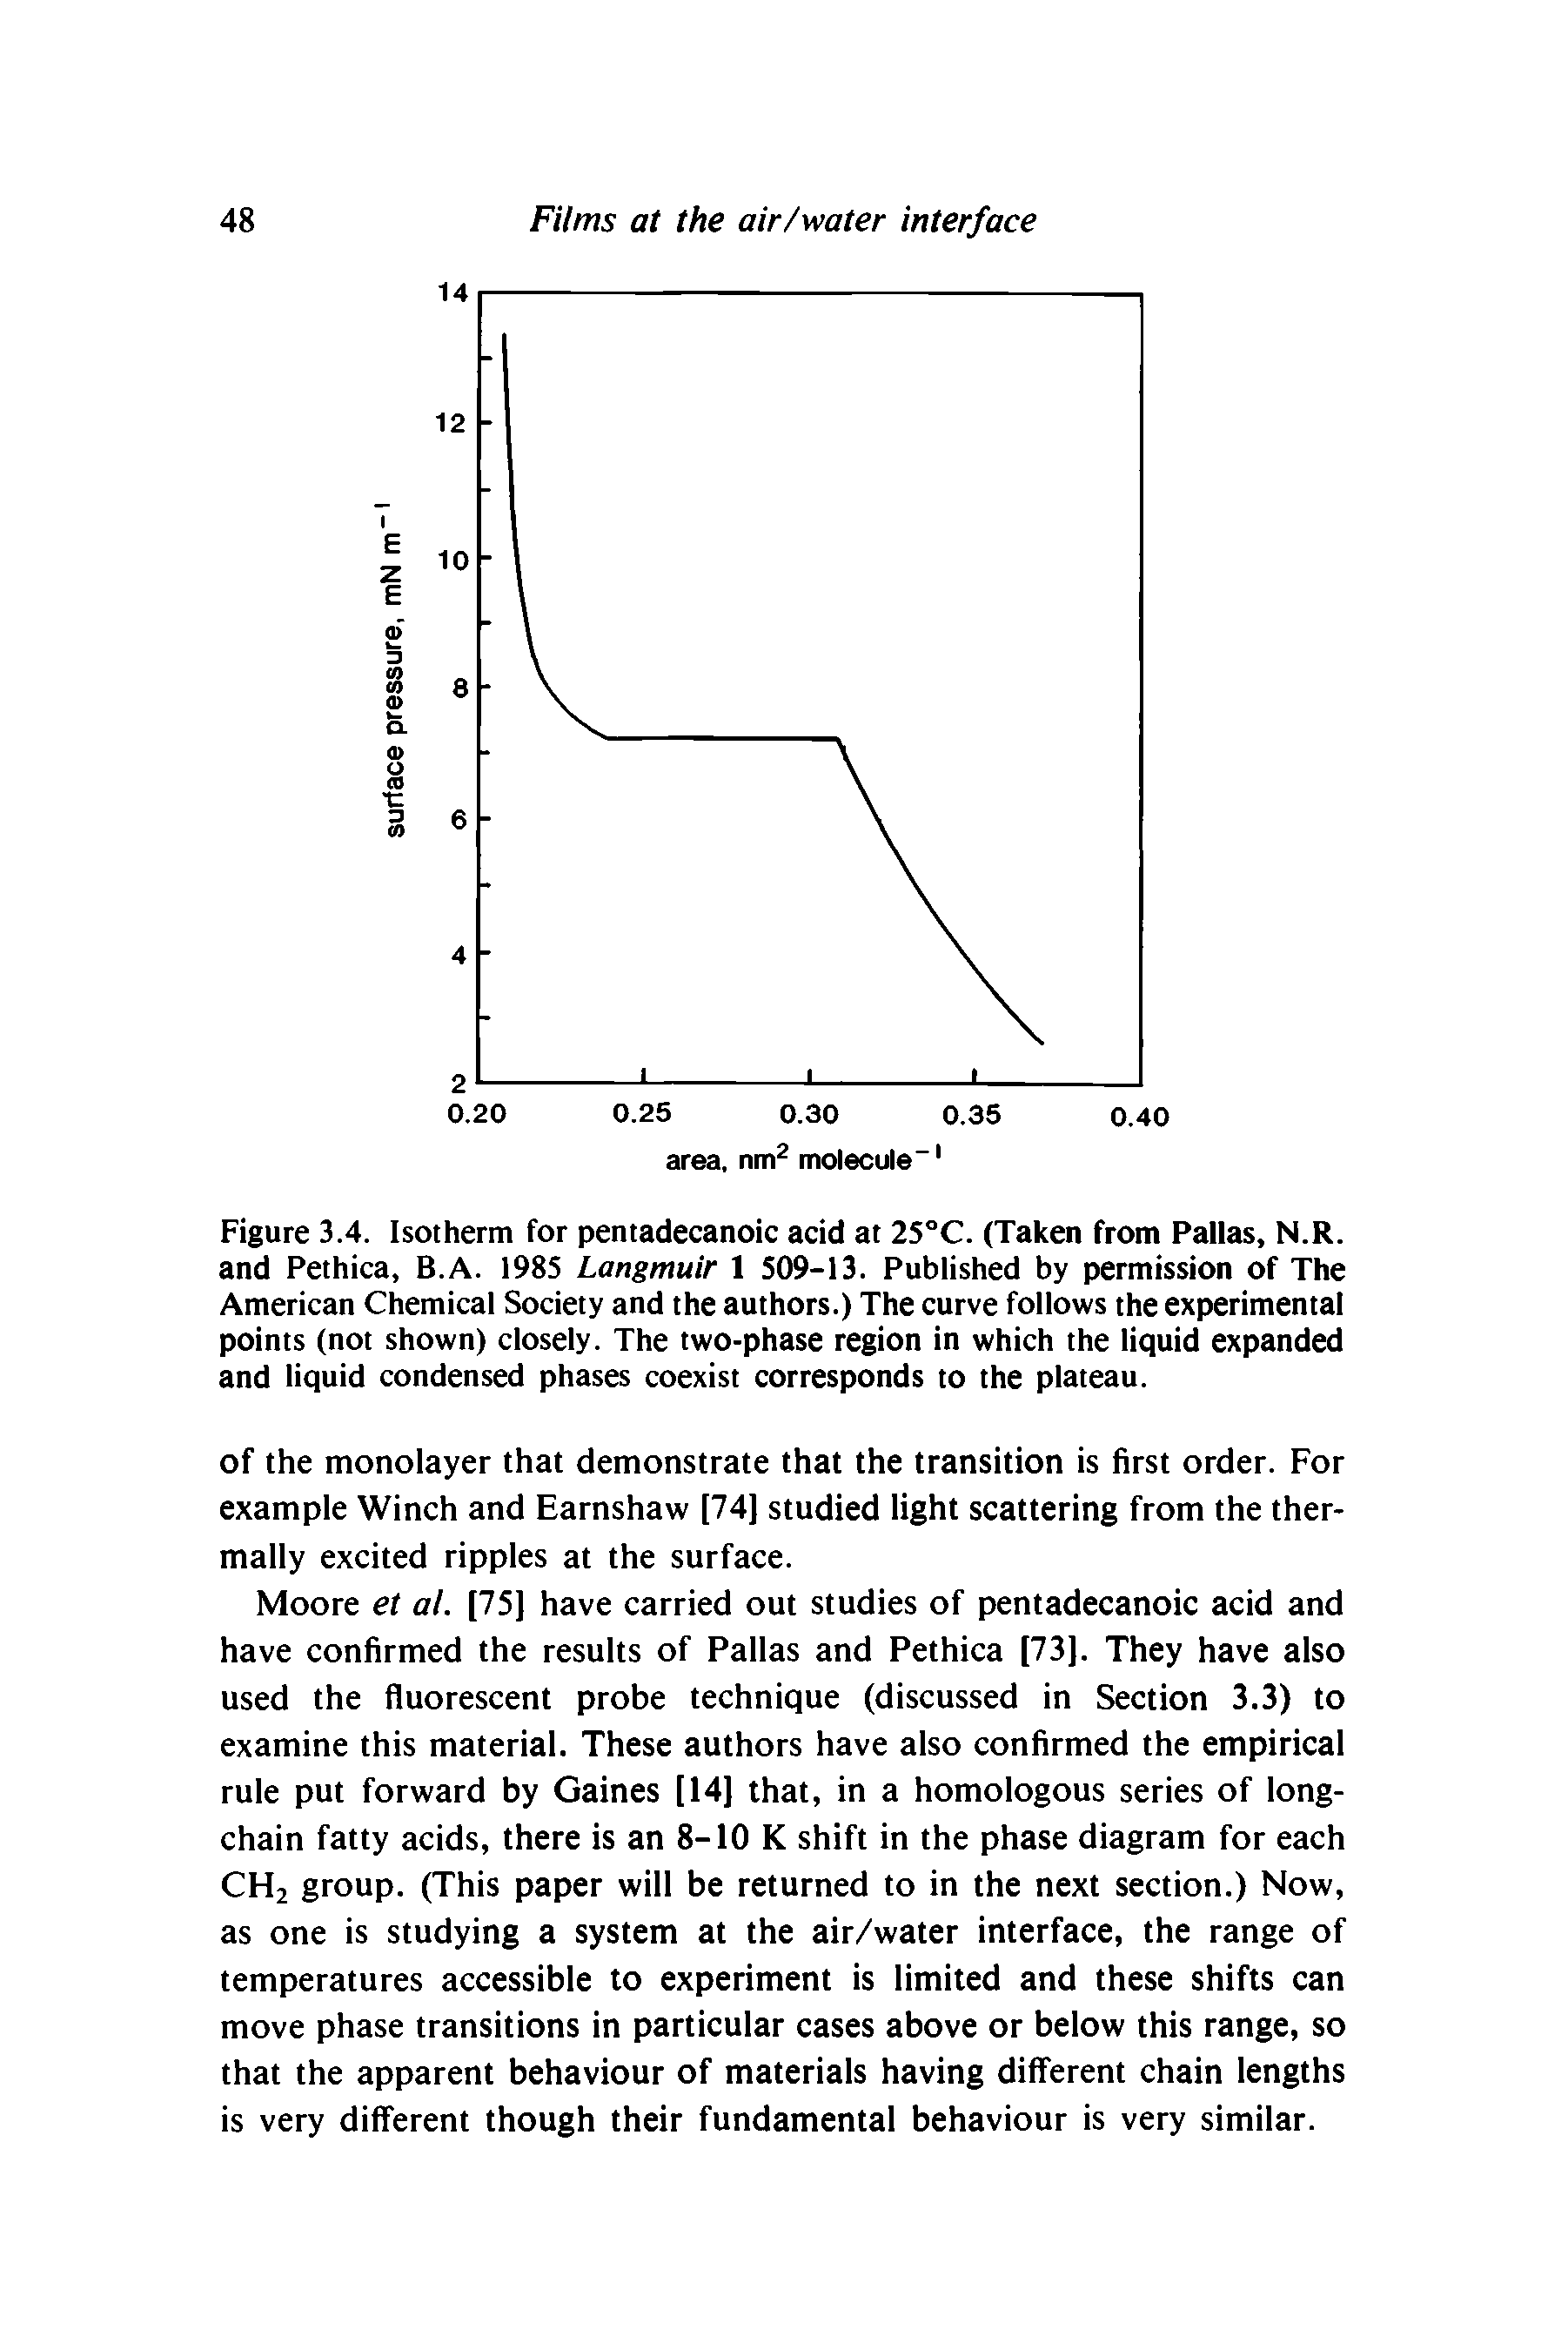 Figure 3.4. Isotherm for pentadecanoic acid at 25°C. (Taken from Pallas, N.R. and Pethica, B.A. 1985 Langmuir 1 509-13. Published by permission of The American Chemical Society and the authors.) The curve follows the experimental points (not shown) closely. The two-phase region in which the liquid expanded and liquid condensed phases coexist corresponds to the plateau.